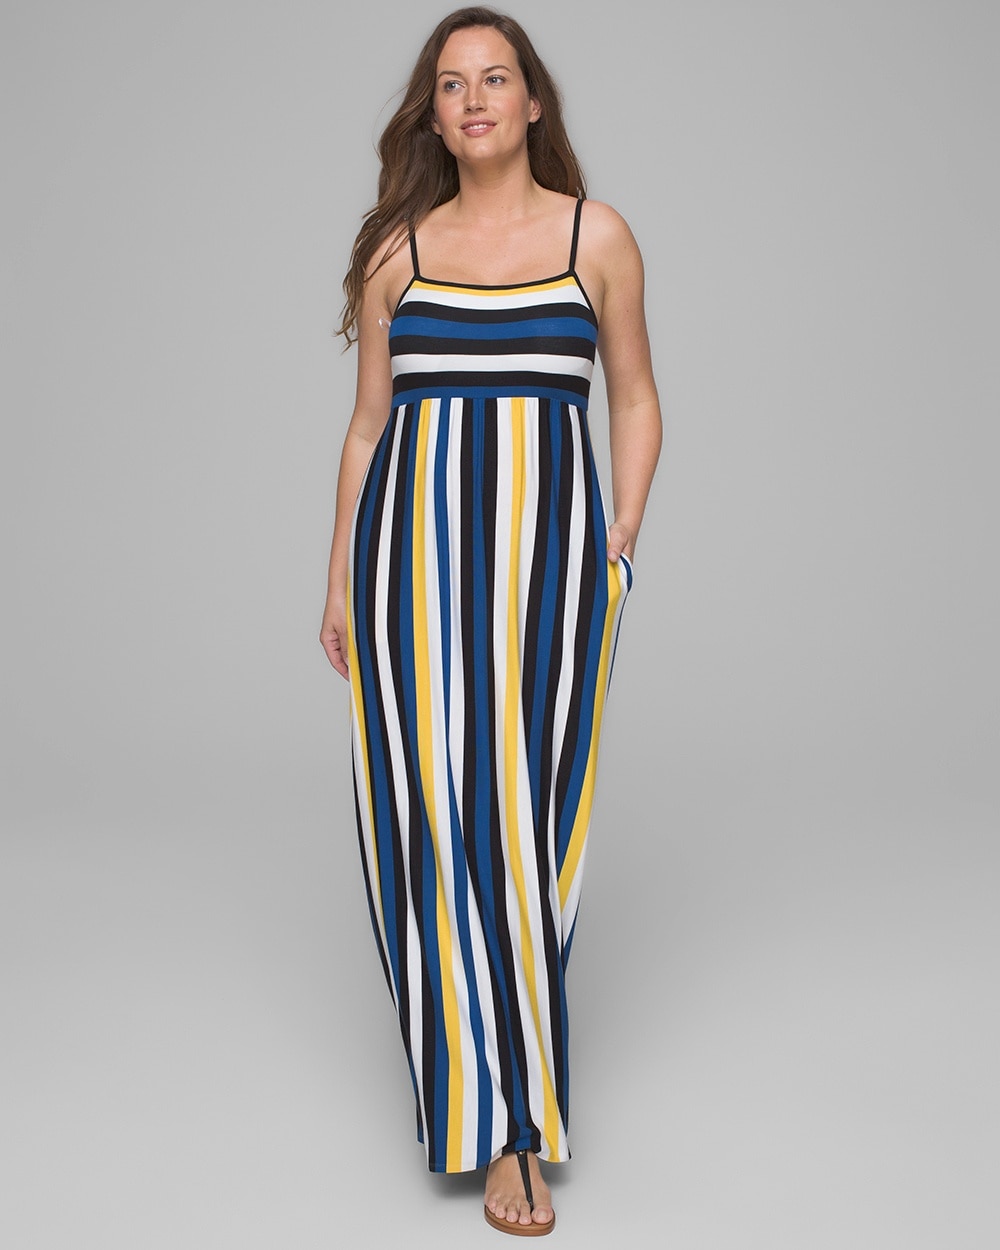 Striped Maxi Dress with Built-In Bra